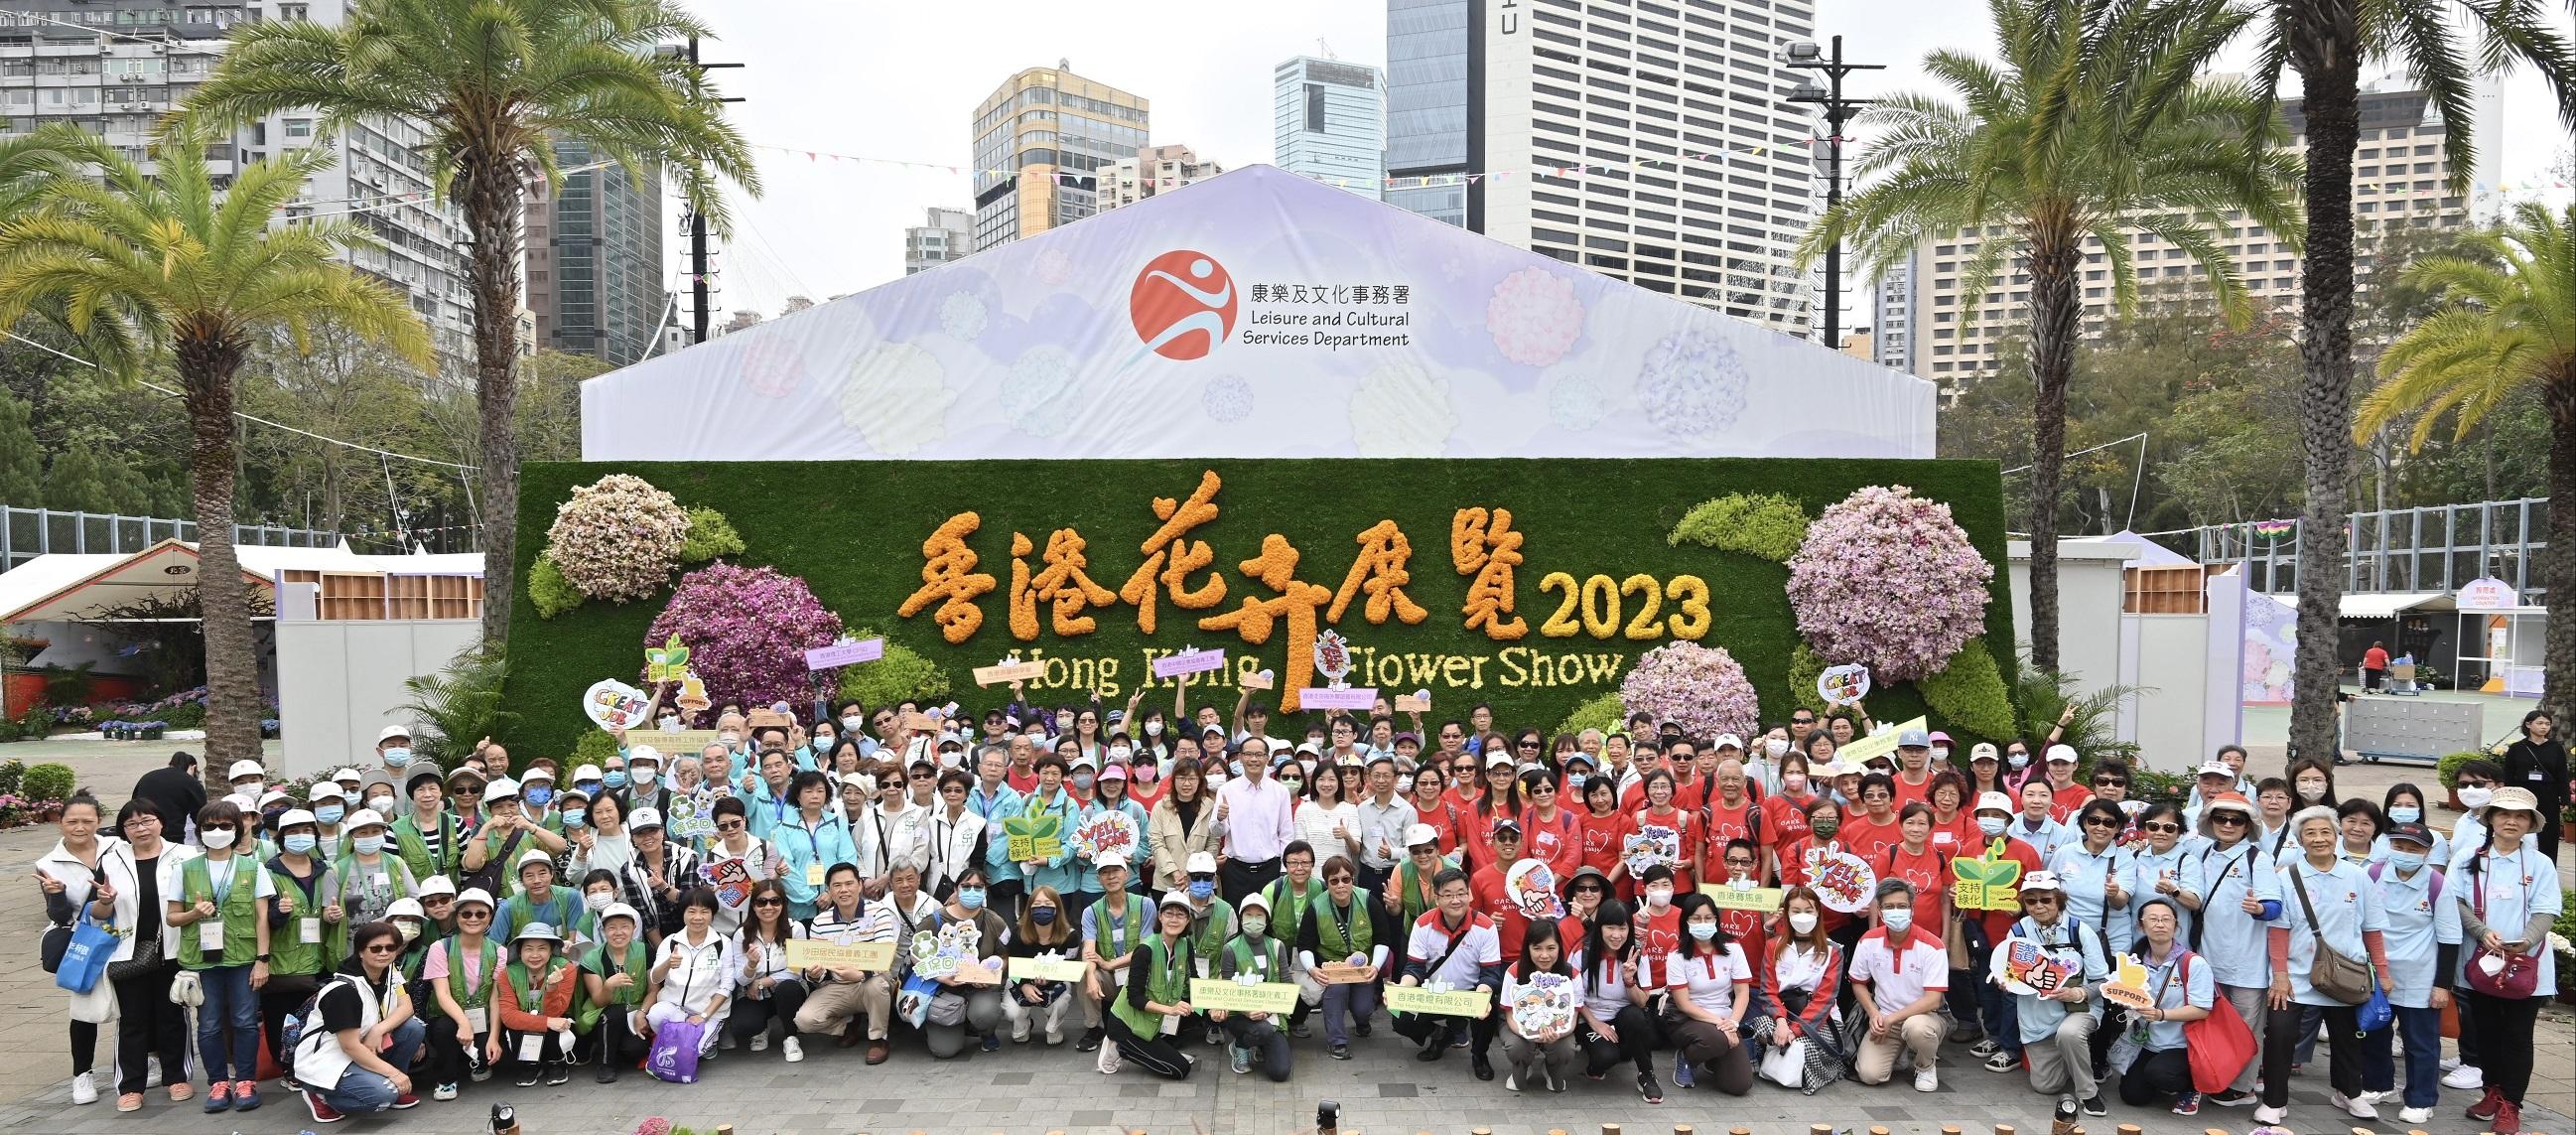 The Green Recycling Day (GRD) activities for the Hong Kong Flower Show organised by the Leisure and Cultural Services Department (LCSD) were held today (March 20) and will continue tomorrow (March 21) to reinforce green measures and reduce waste, reflecting the department's commitment to implementing green measures for environmental protection in its large-scale events. Photo shows volunteers participating in the GRD today and LCSD staff. 